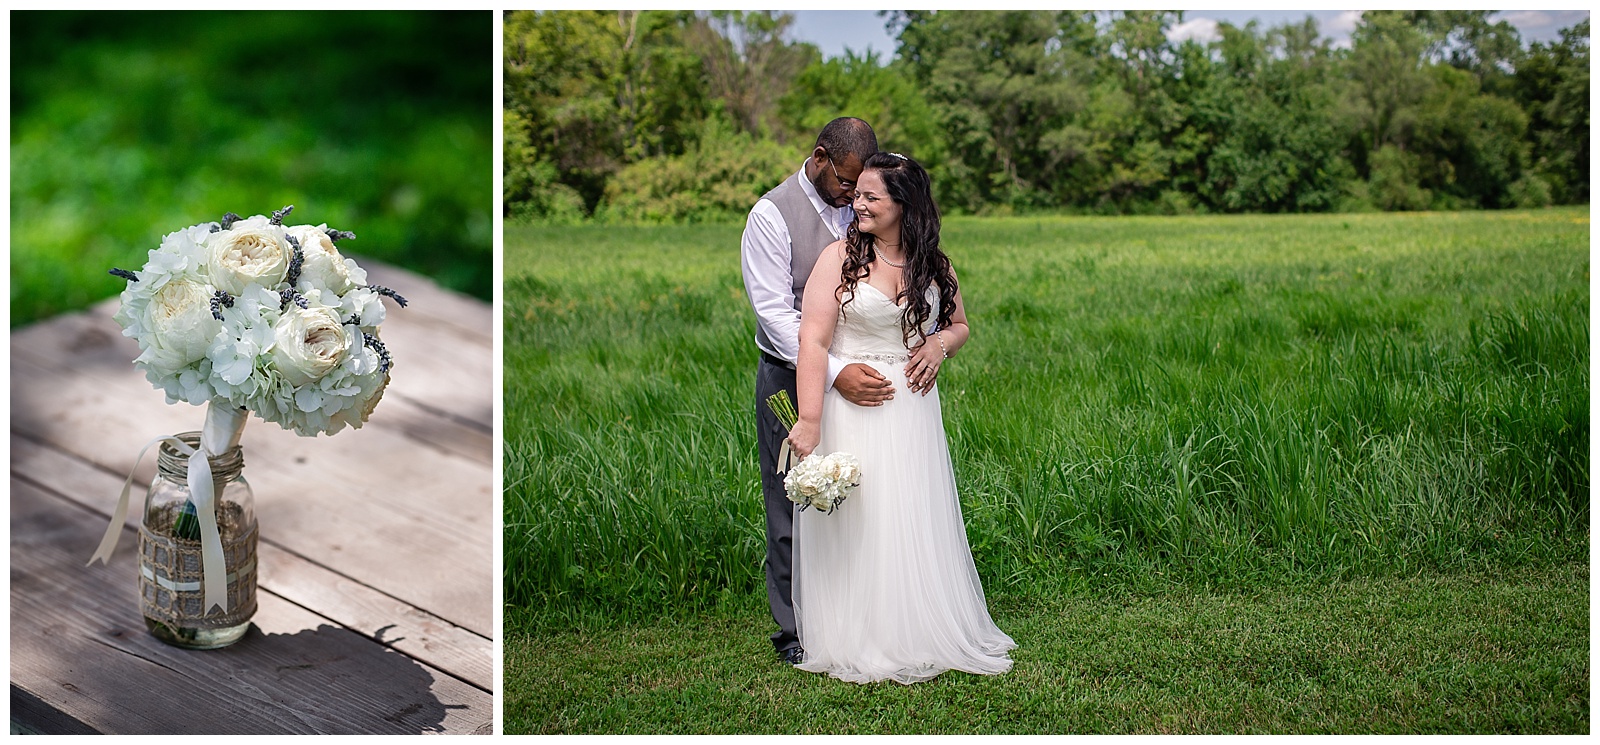 Wedding photography at Ransomed Heart Ranch in Lone Jack, Missouri.